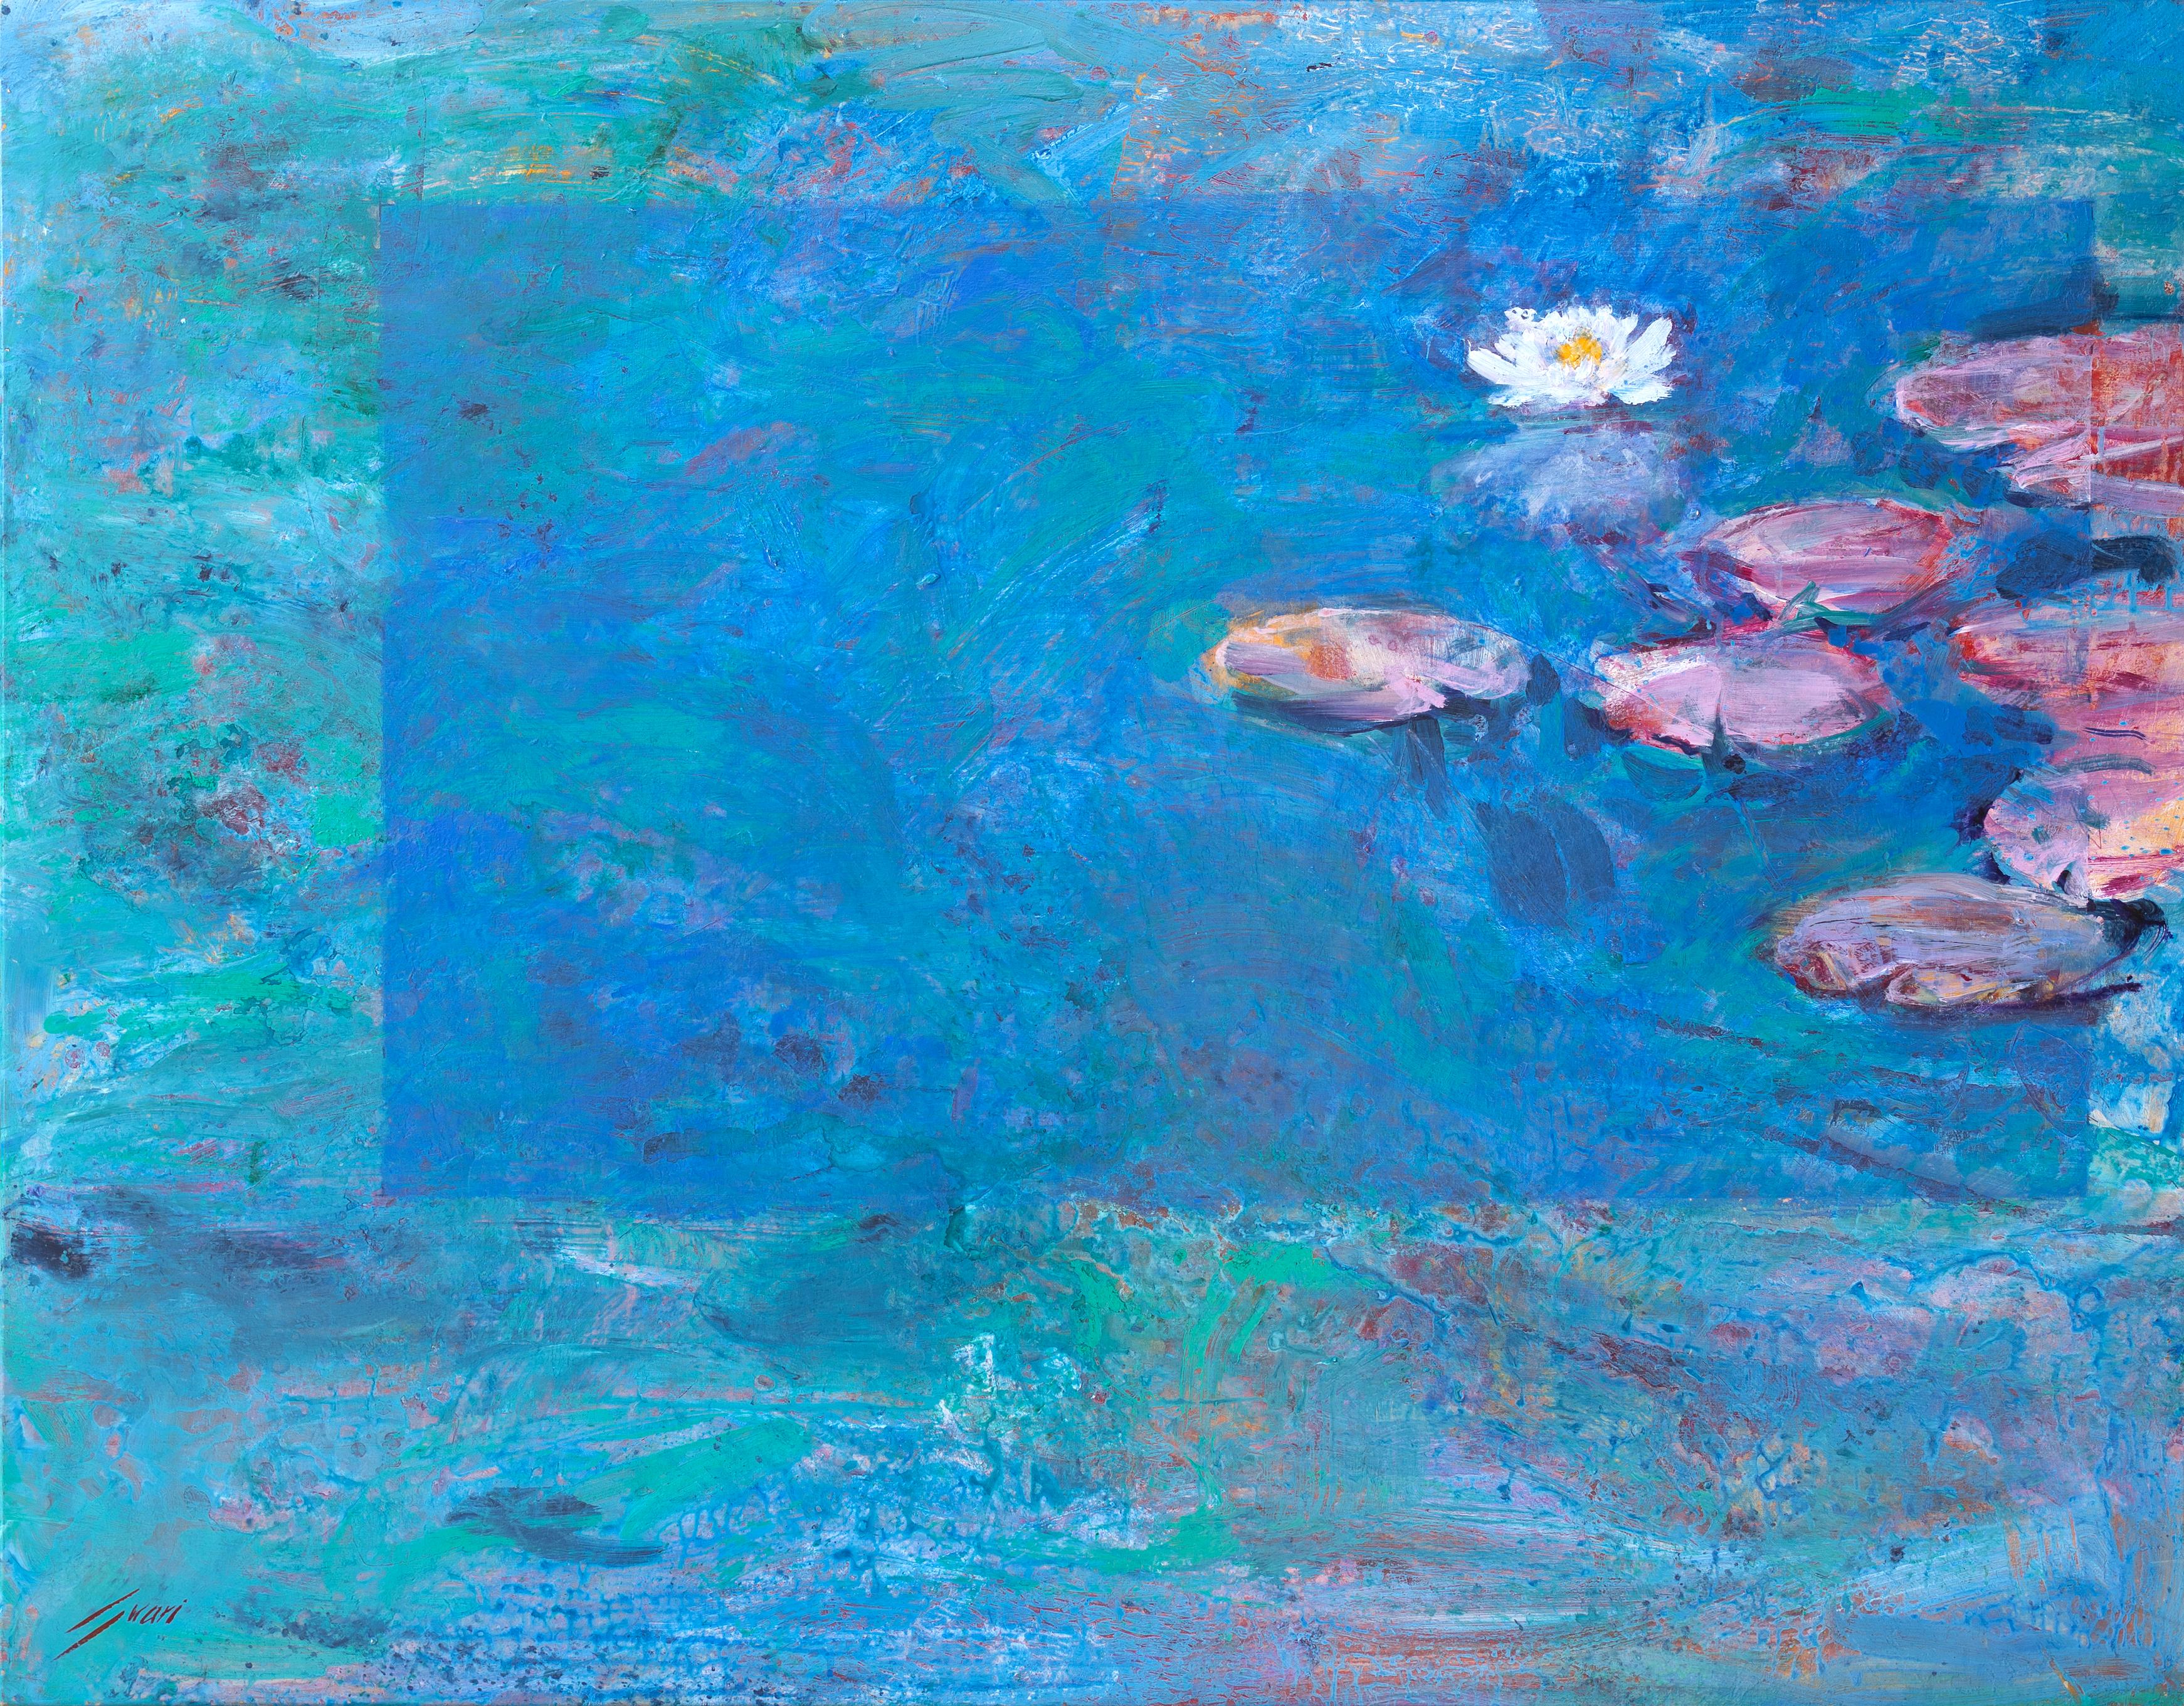 "Nenufares Fonda Azules, " Expressionist Painting of a Pond with Pink Lily Pads